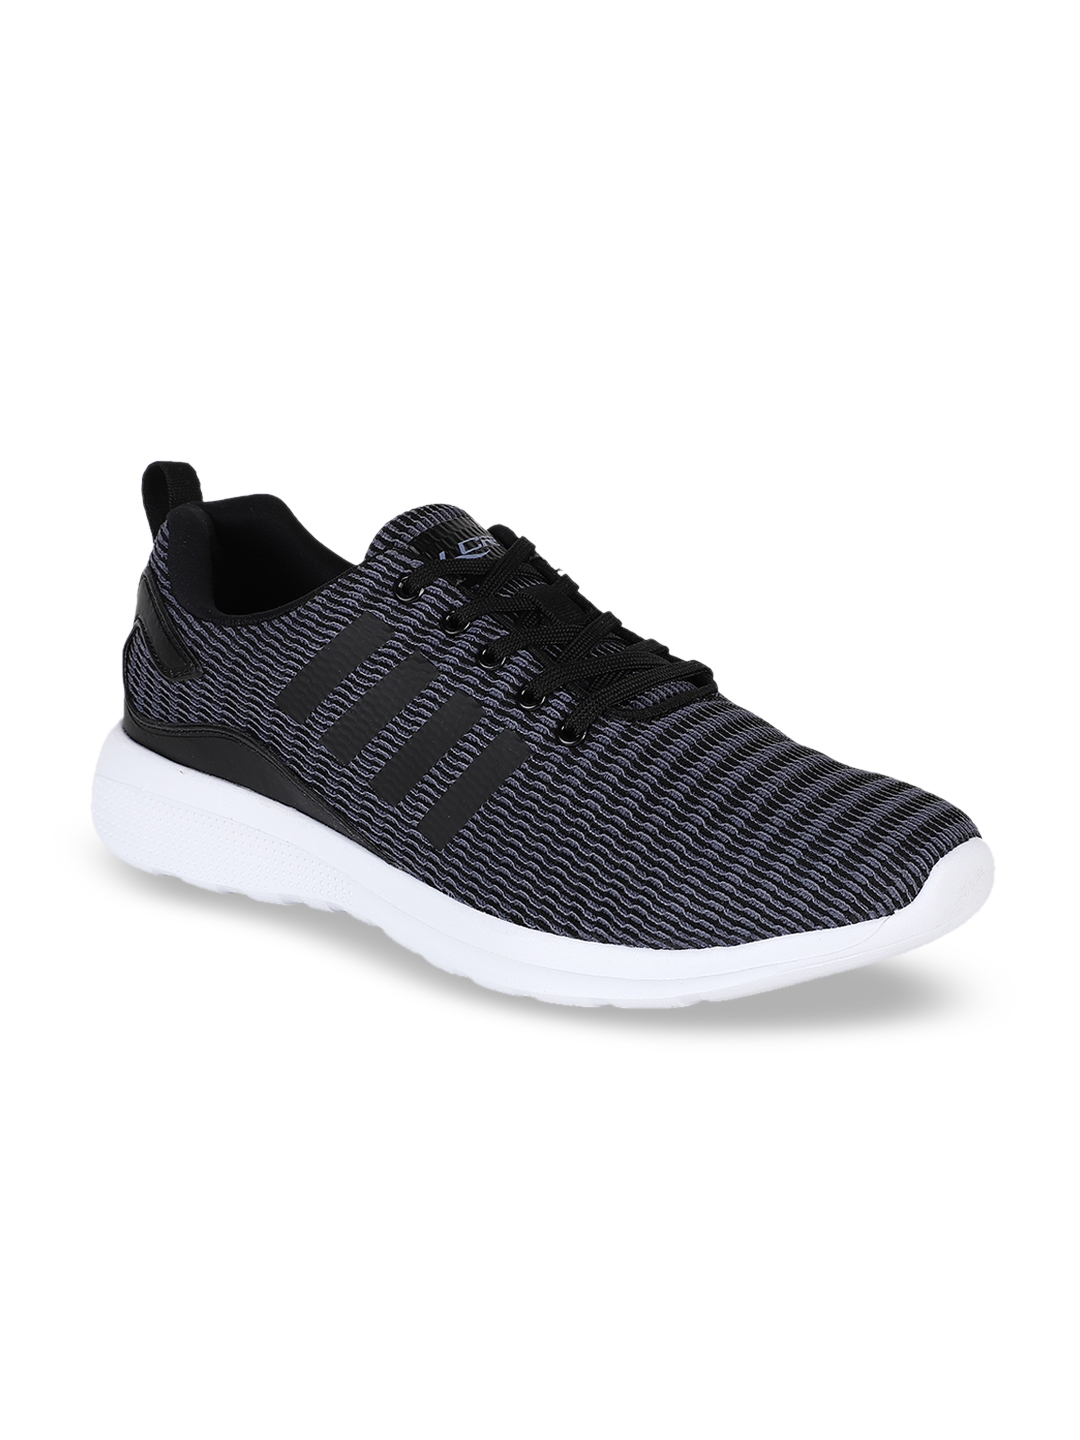 Buy Lancer Men Blue Woven Design Lightweight Sneakers - Casual Shoes ...